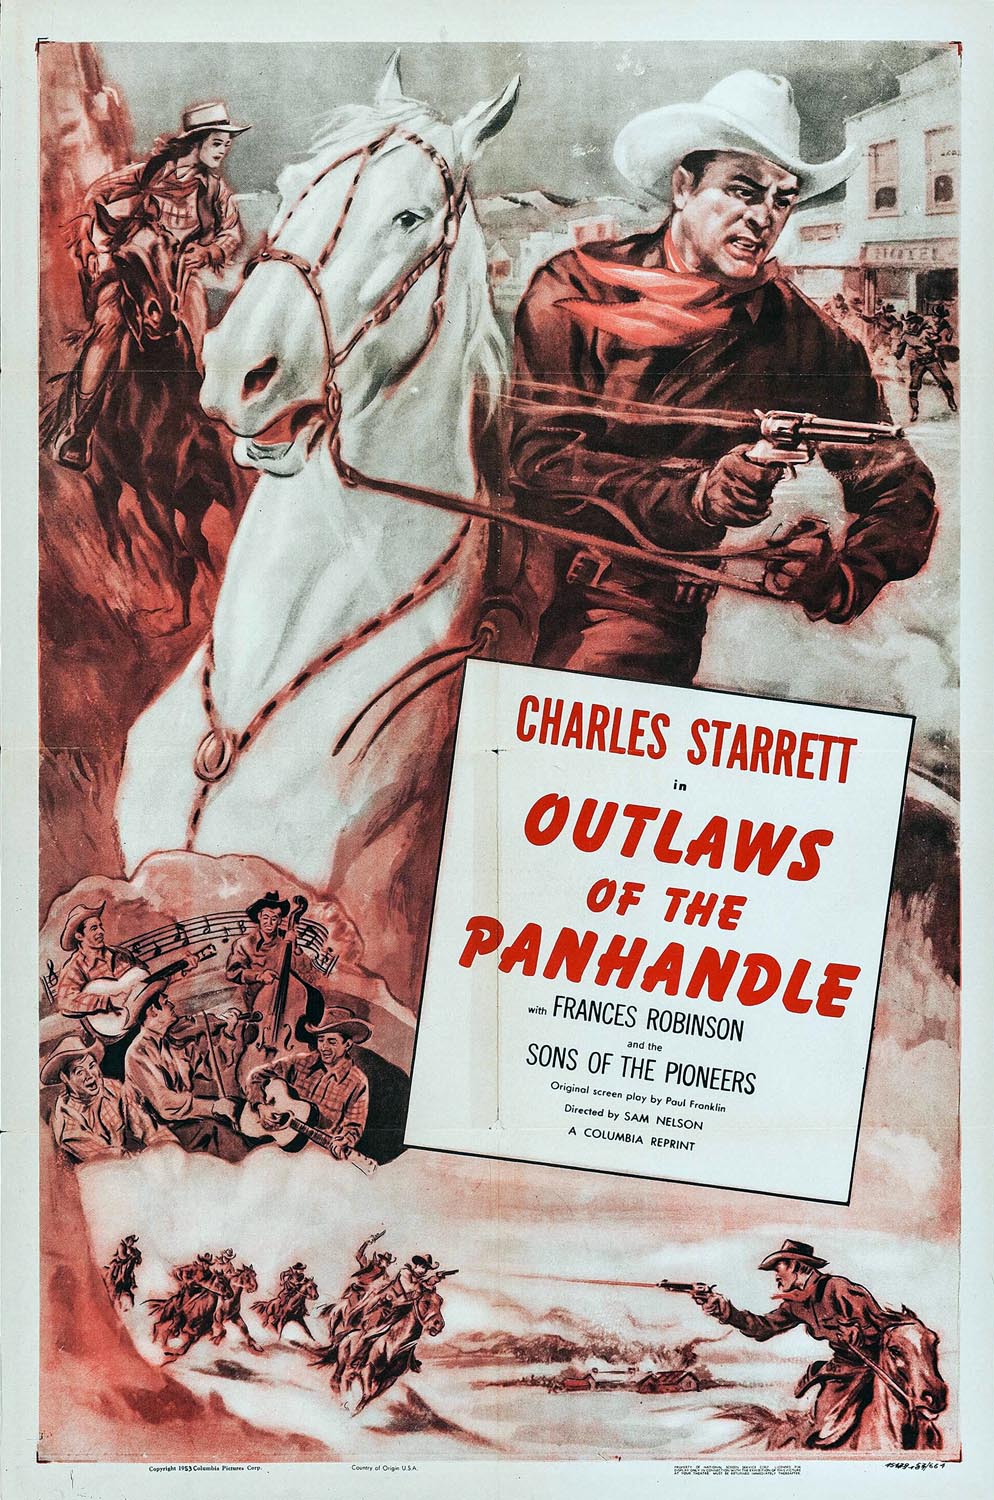 OUTLAWS OF THE PANHANDLE